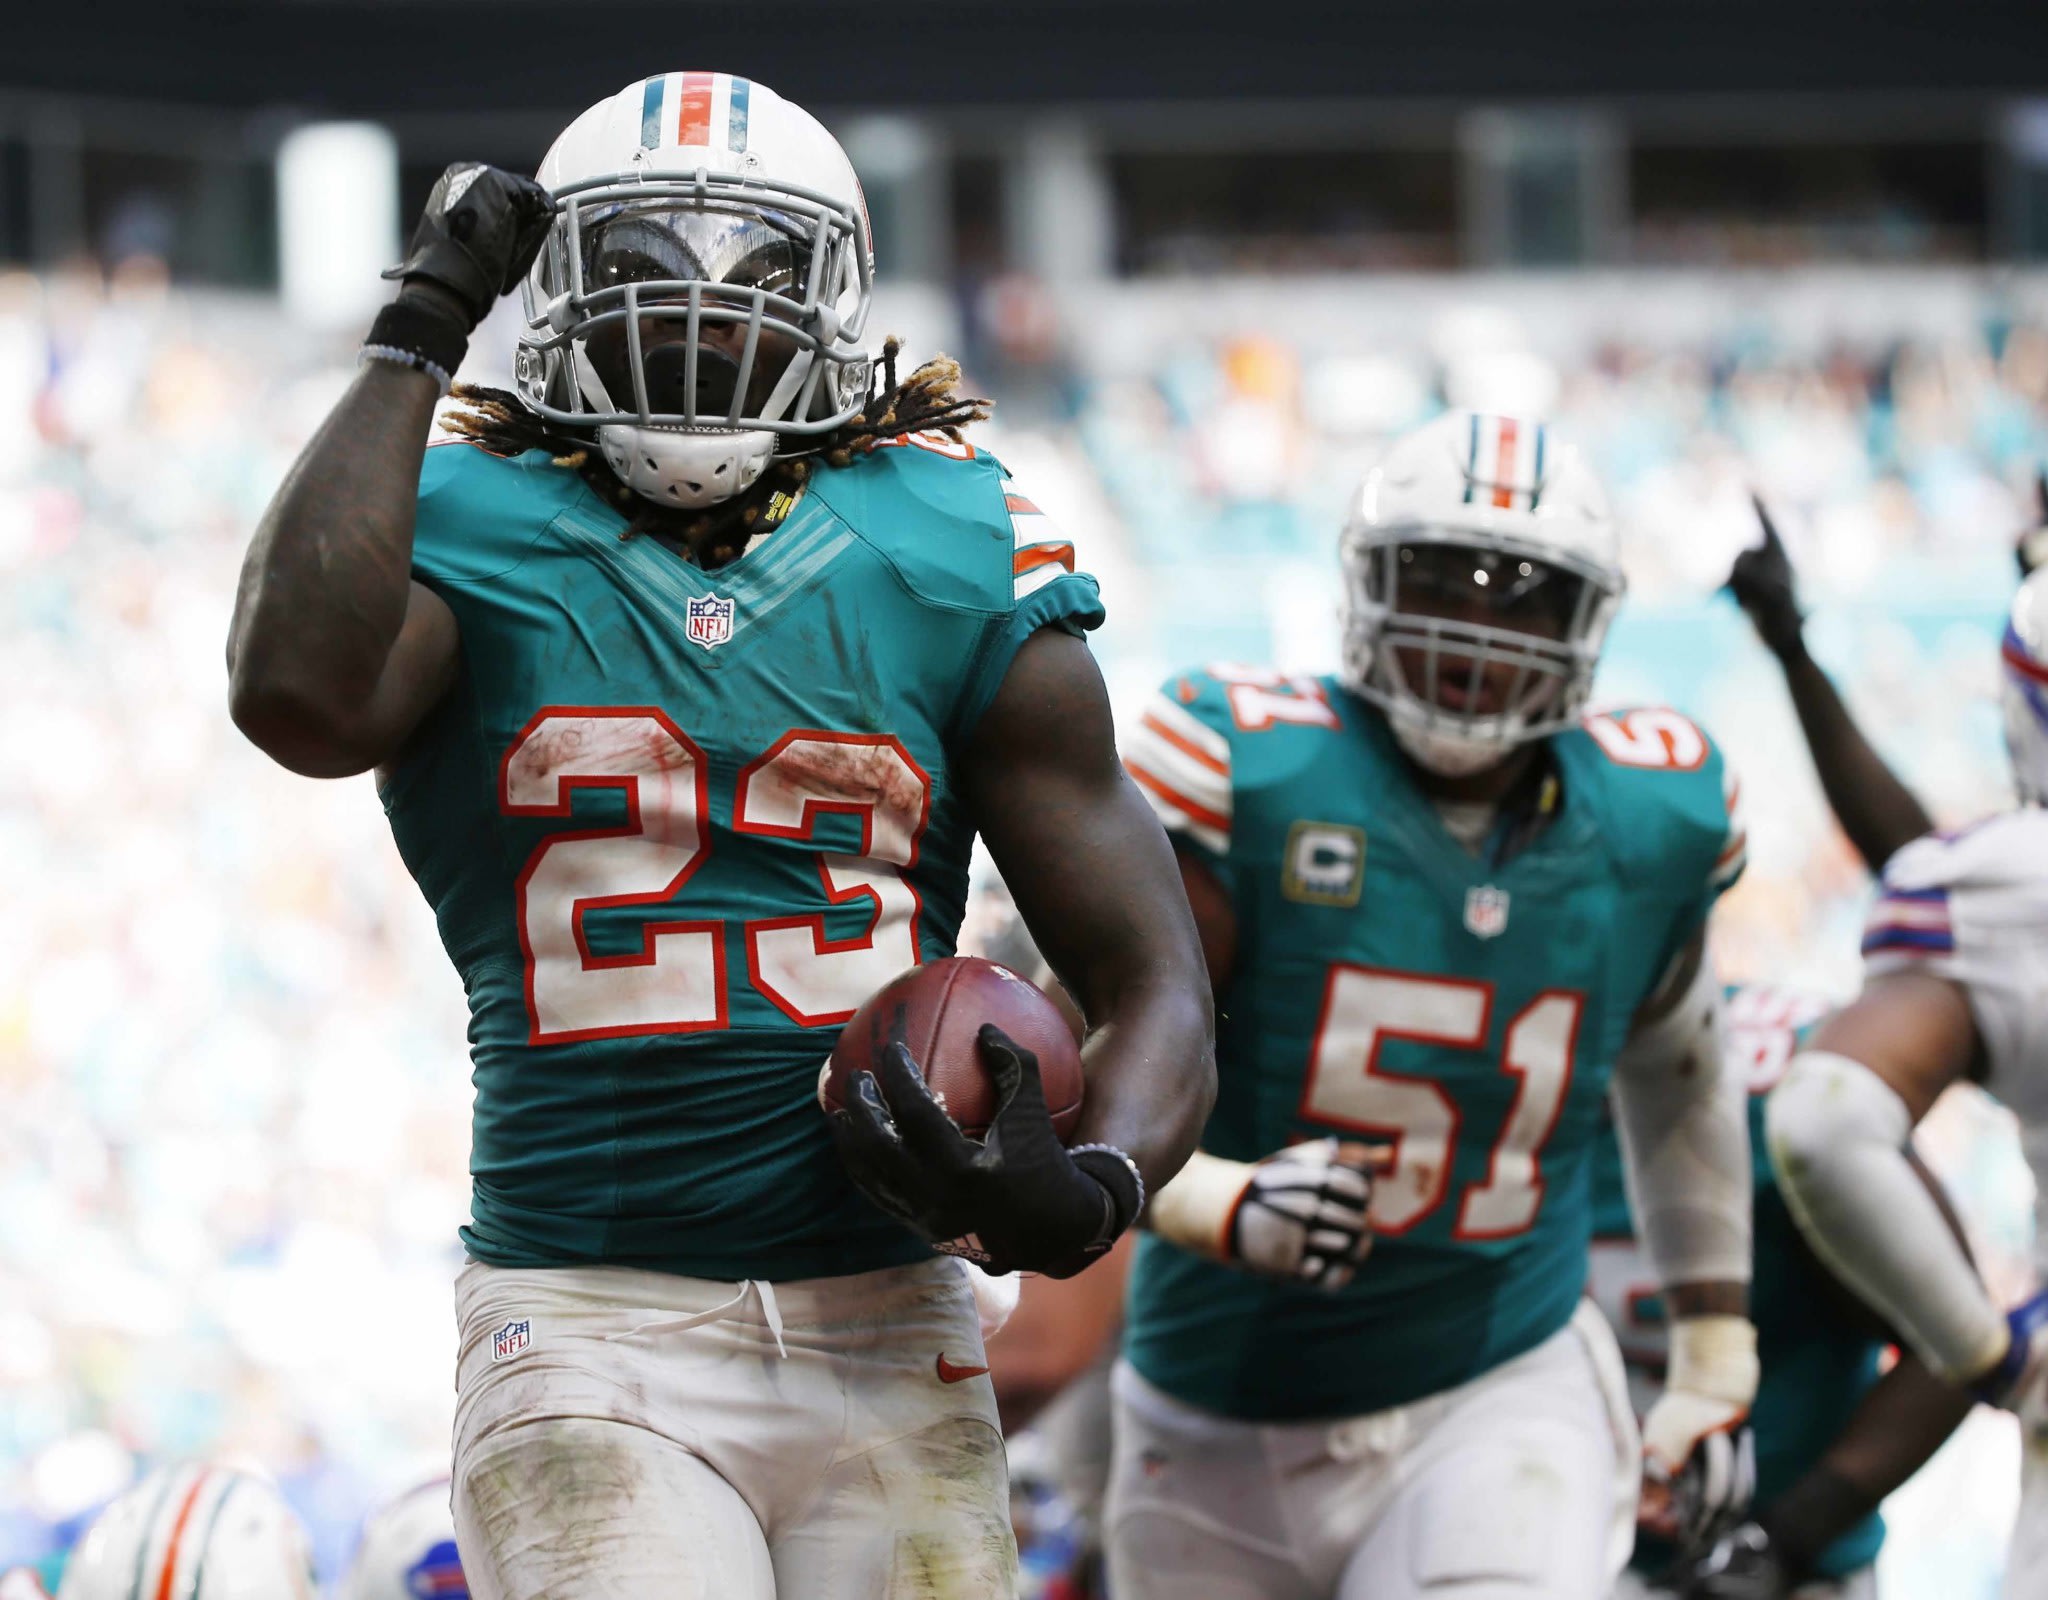 SportsTeamsOfChicago: Miami RB Jay Ajayi becomes just fourth player with back-to-back 200-yard games